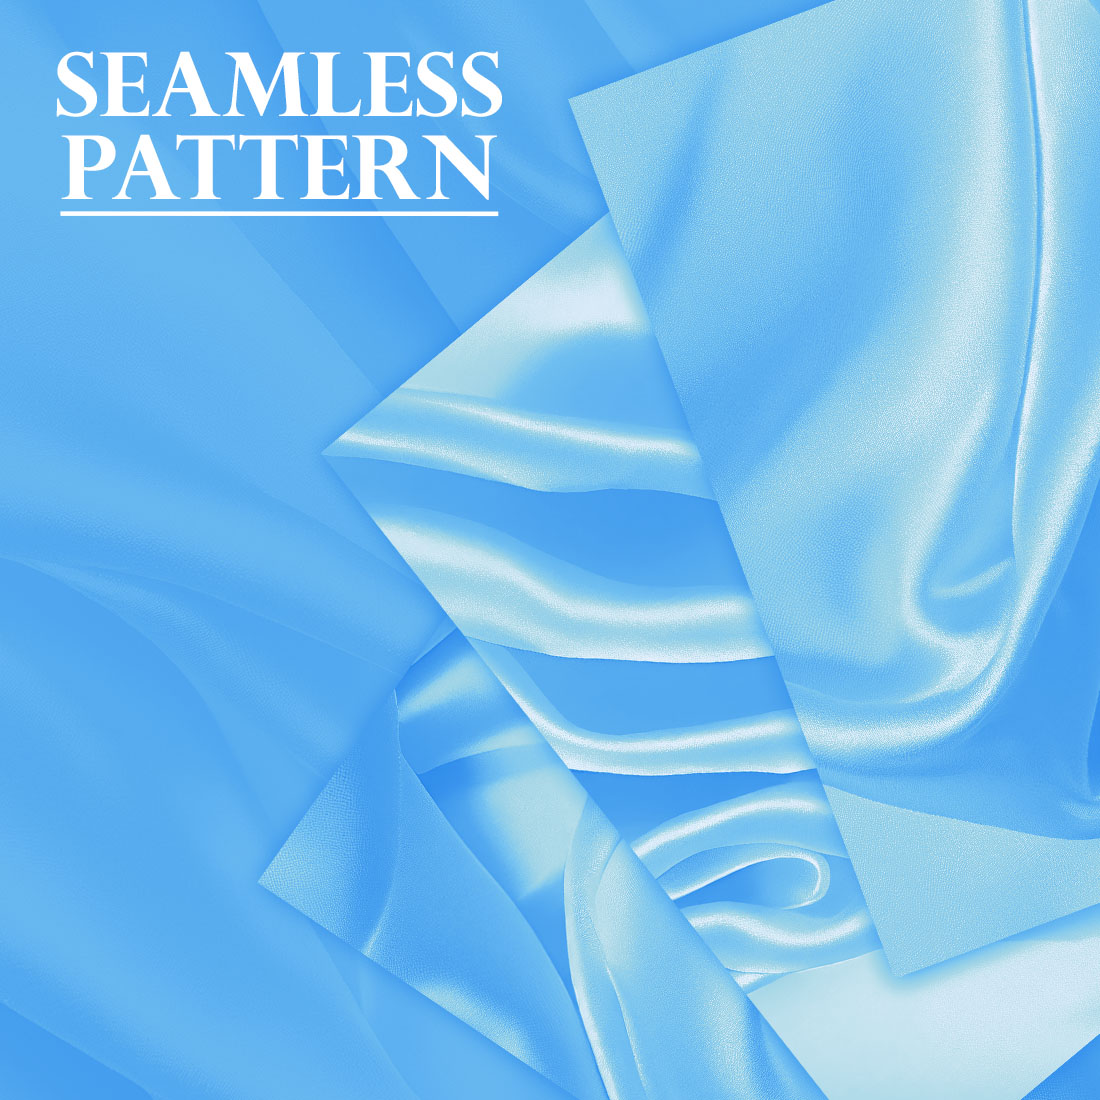 A selection of images with amazing patterns of silk in the color of blue sky.